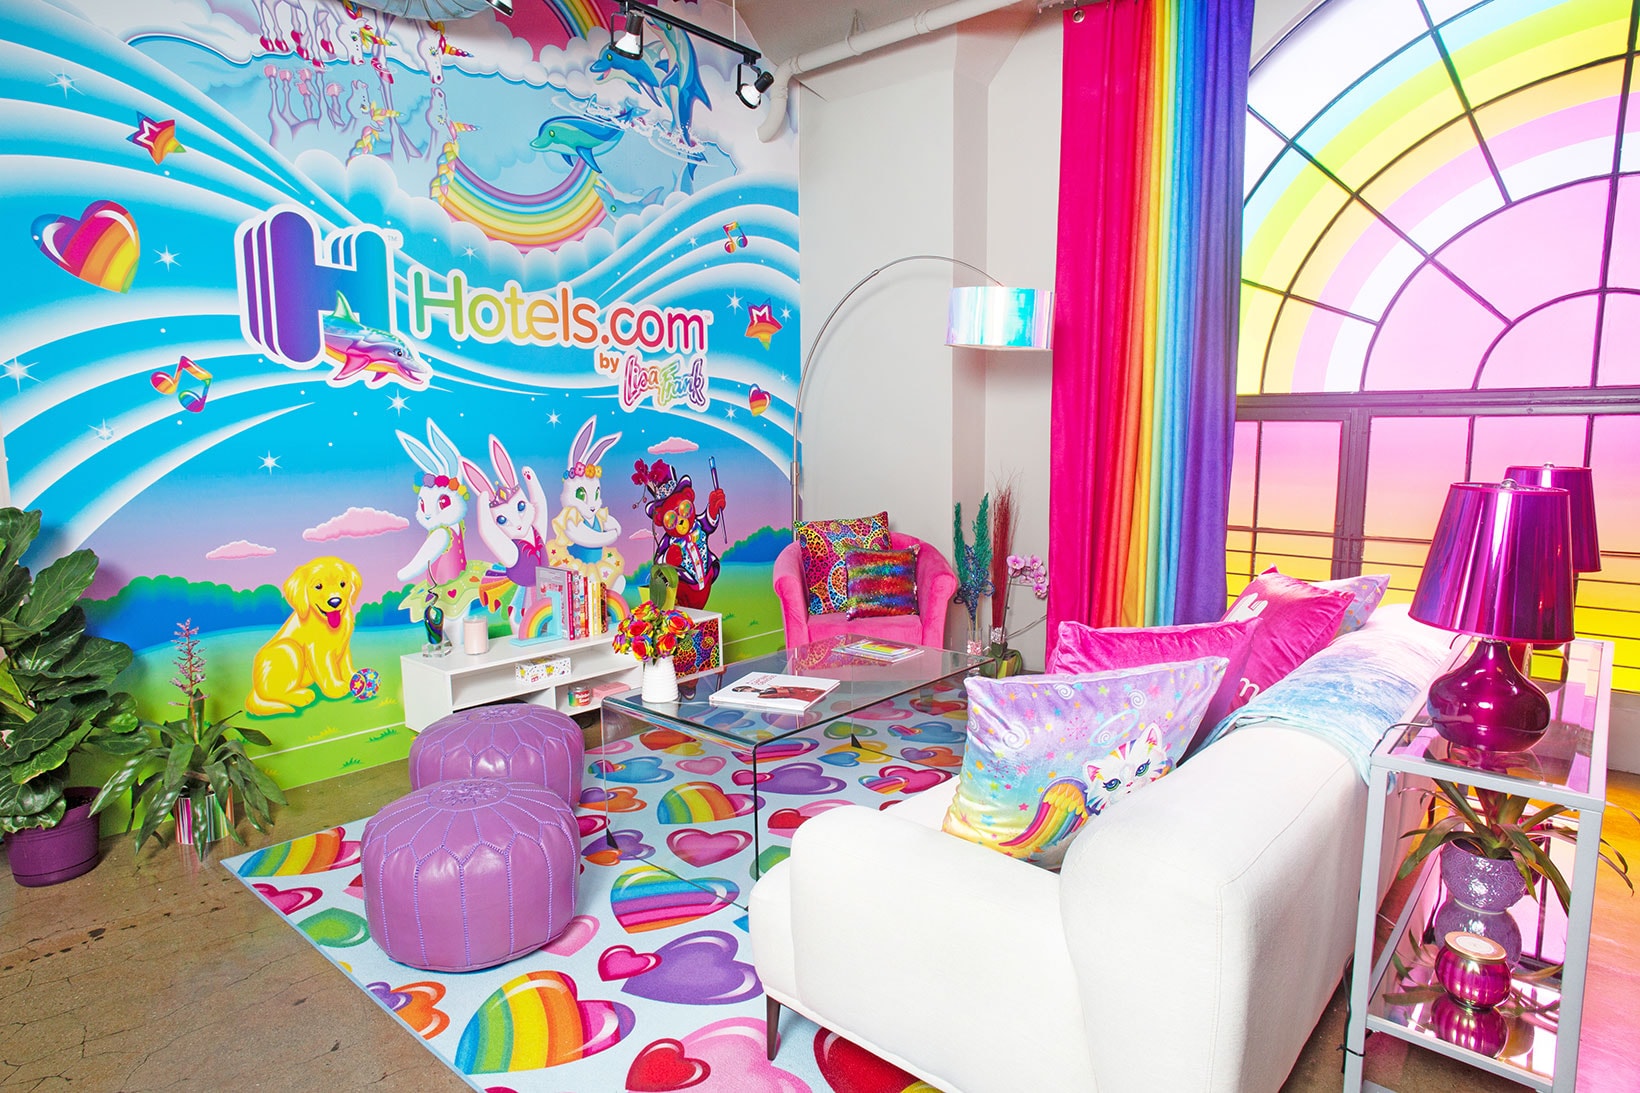 lisa frank hotels com apartment flat room stuff toys furniture couch table lamp rainbow 